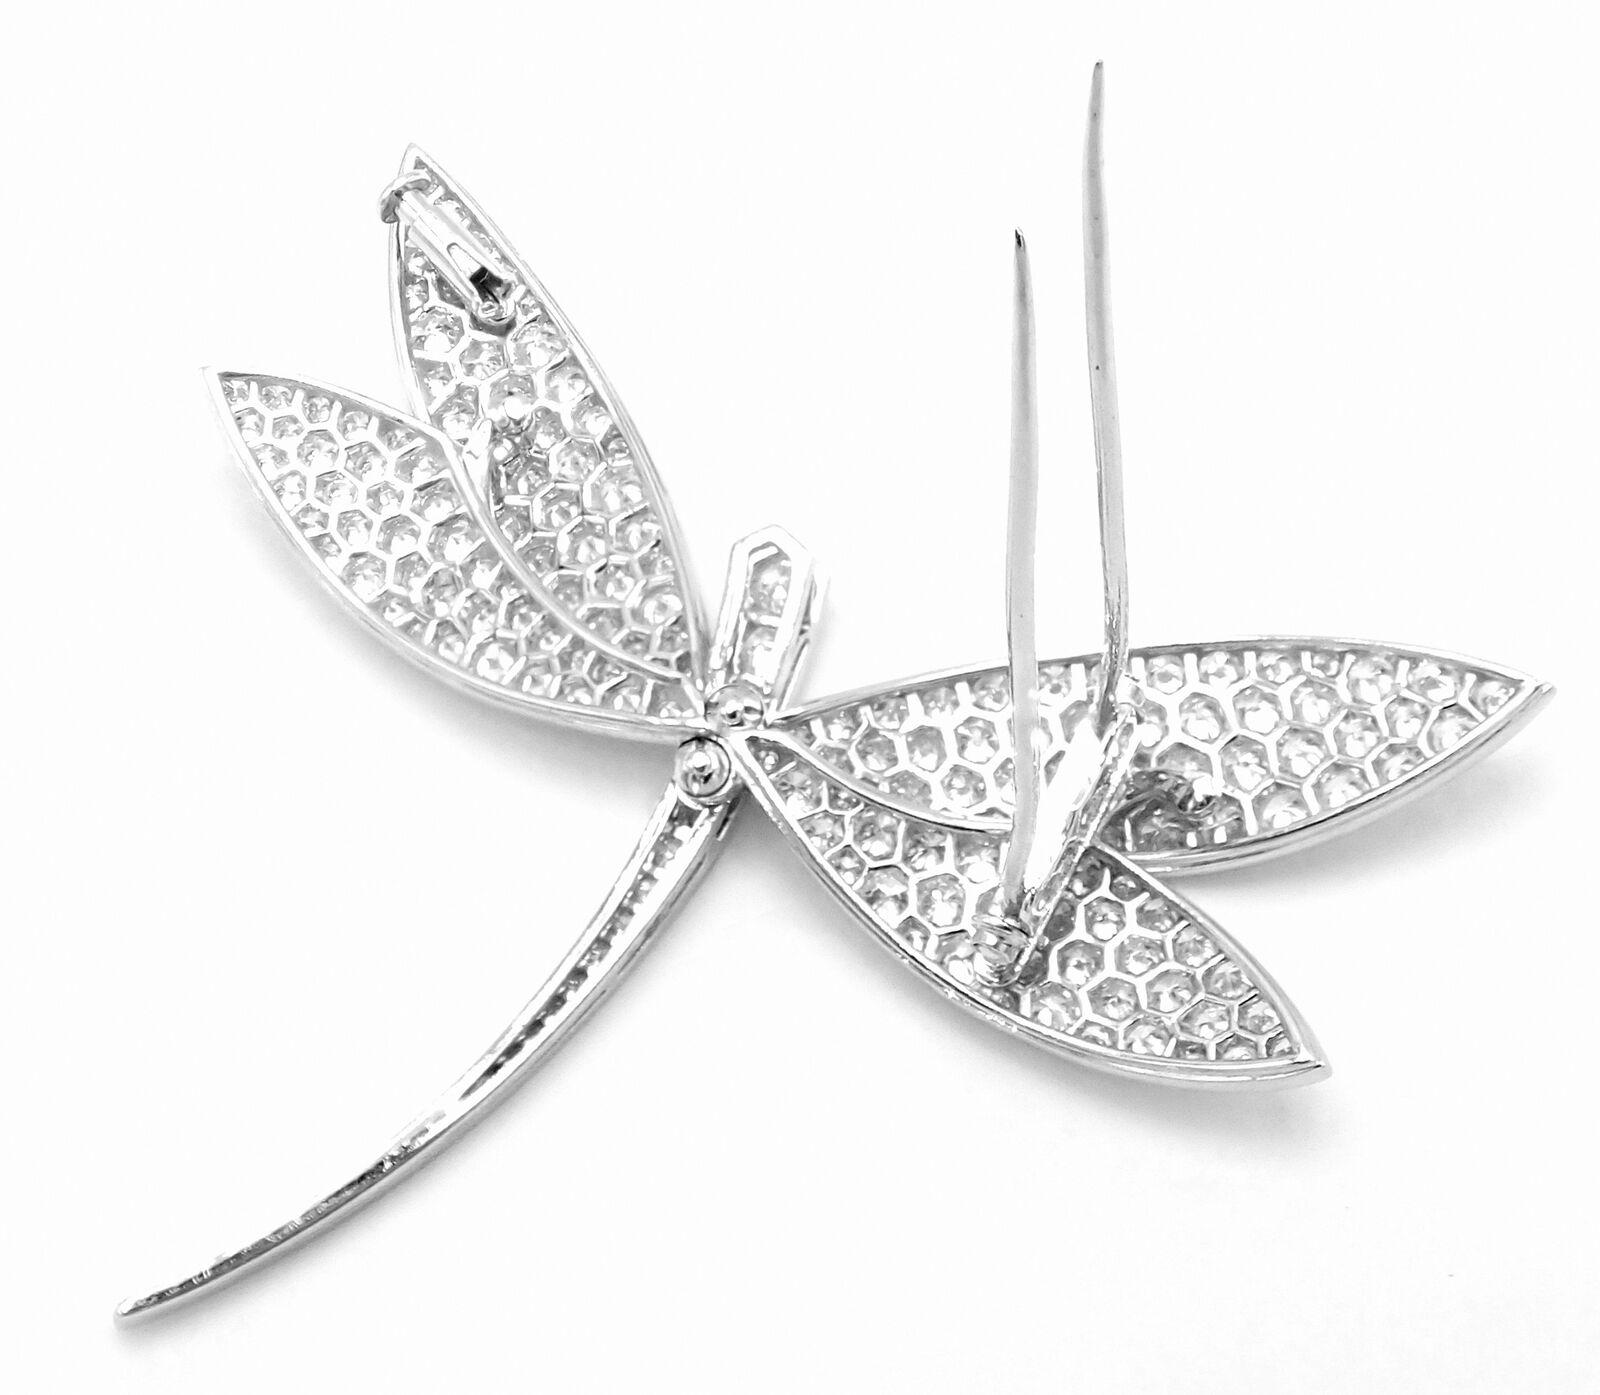 Van Cleef & Arpels Dragonfly Diamond Large White Gold Pin Brooch 1